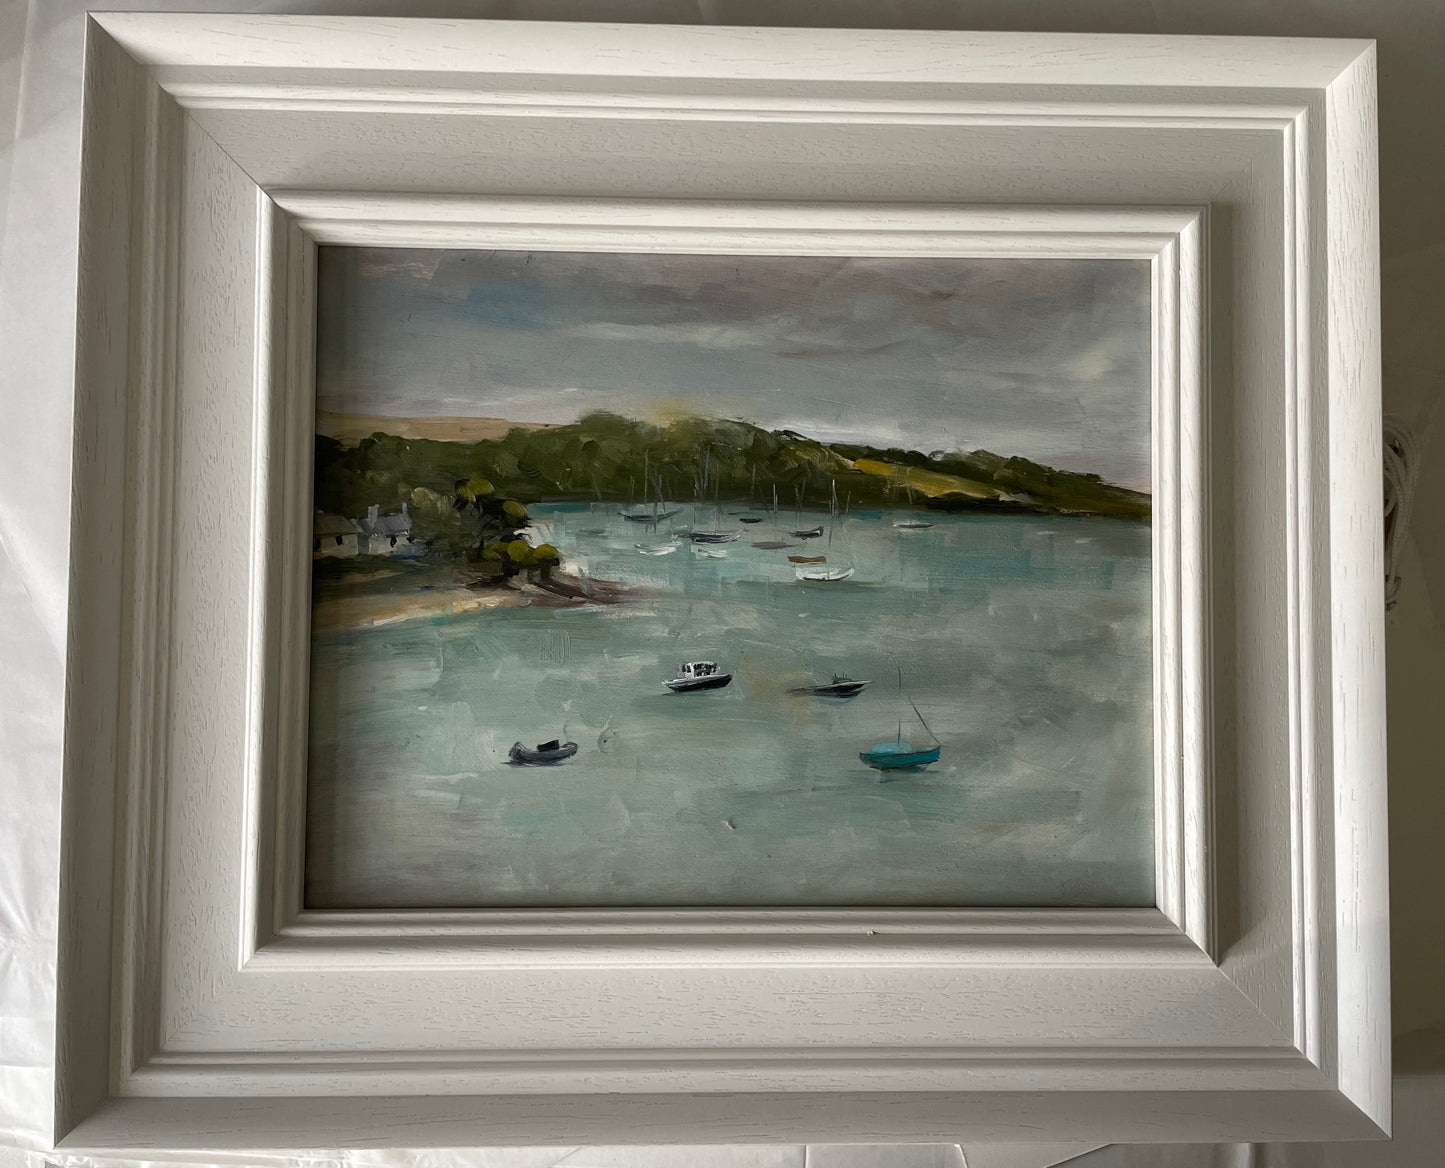 St Mawes across to St Anthony, Cornwall. Original oil painting